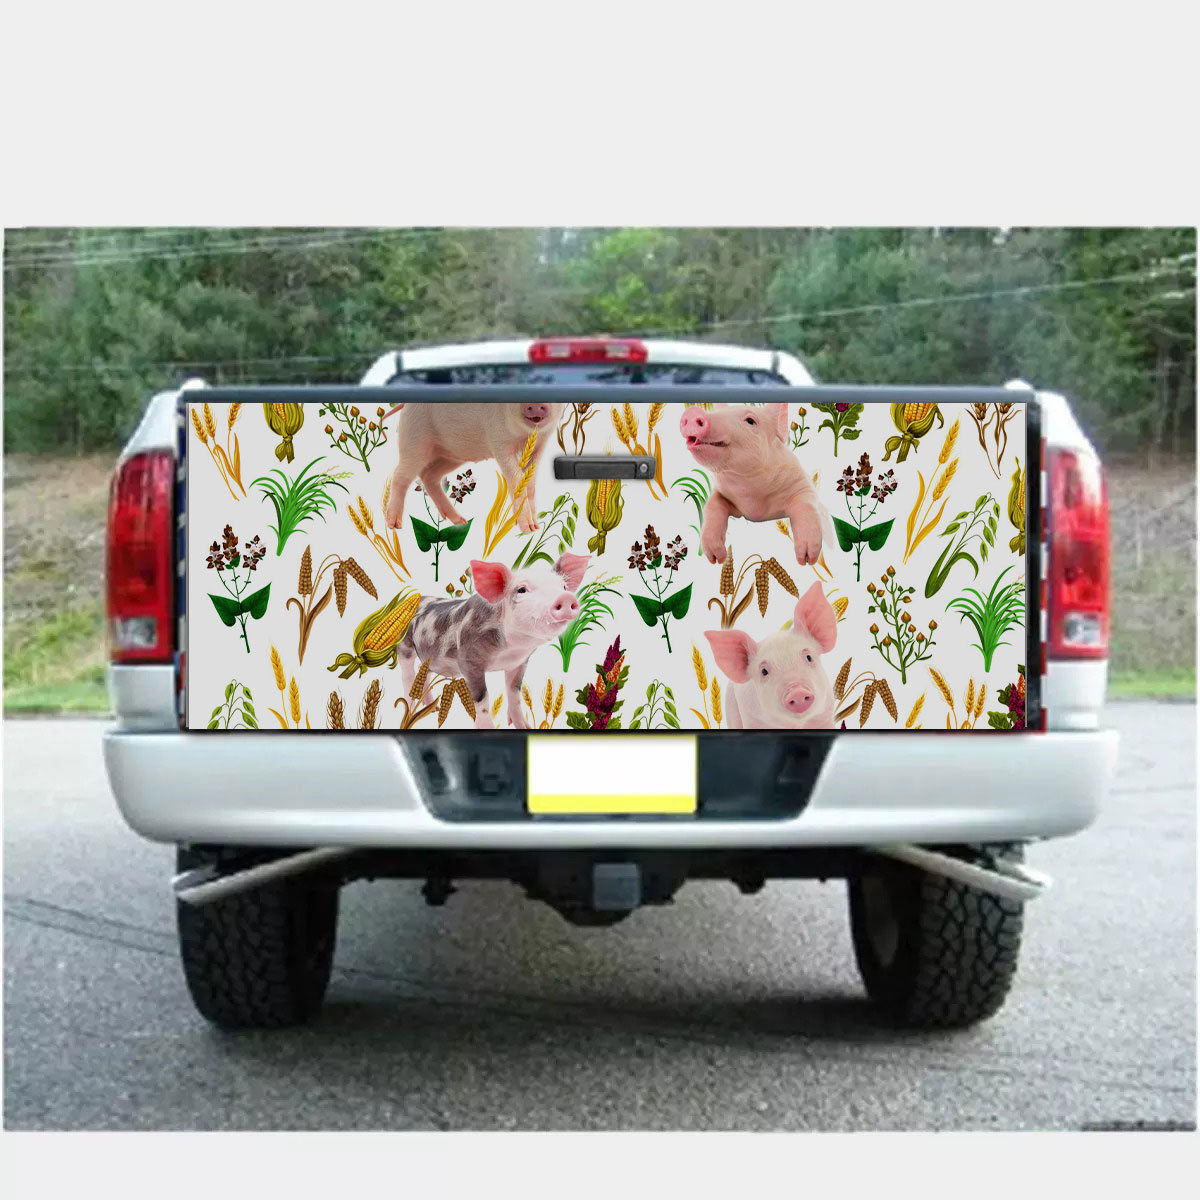 Pig Farm Wheat Pattern Truck Bed Decal